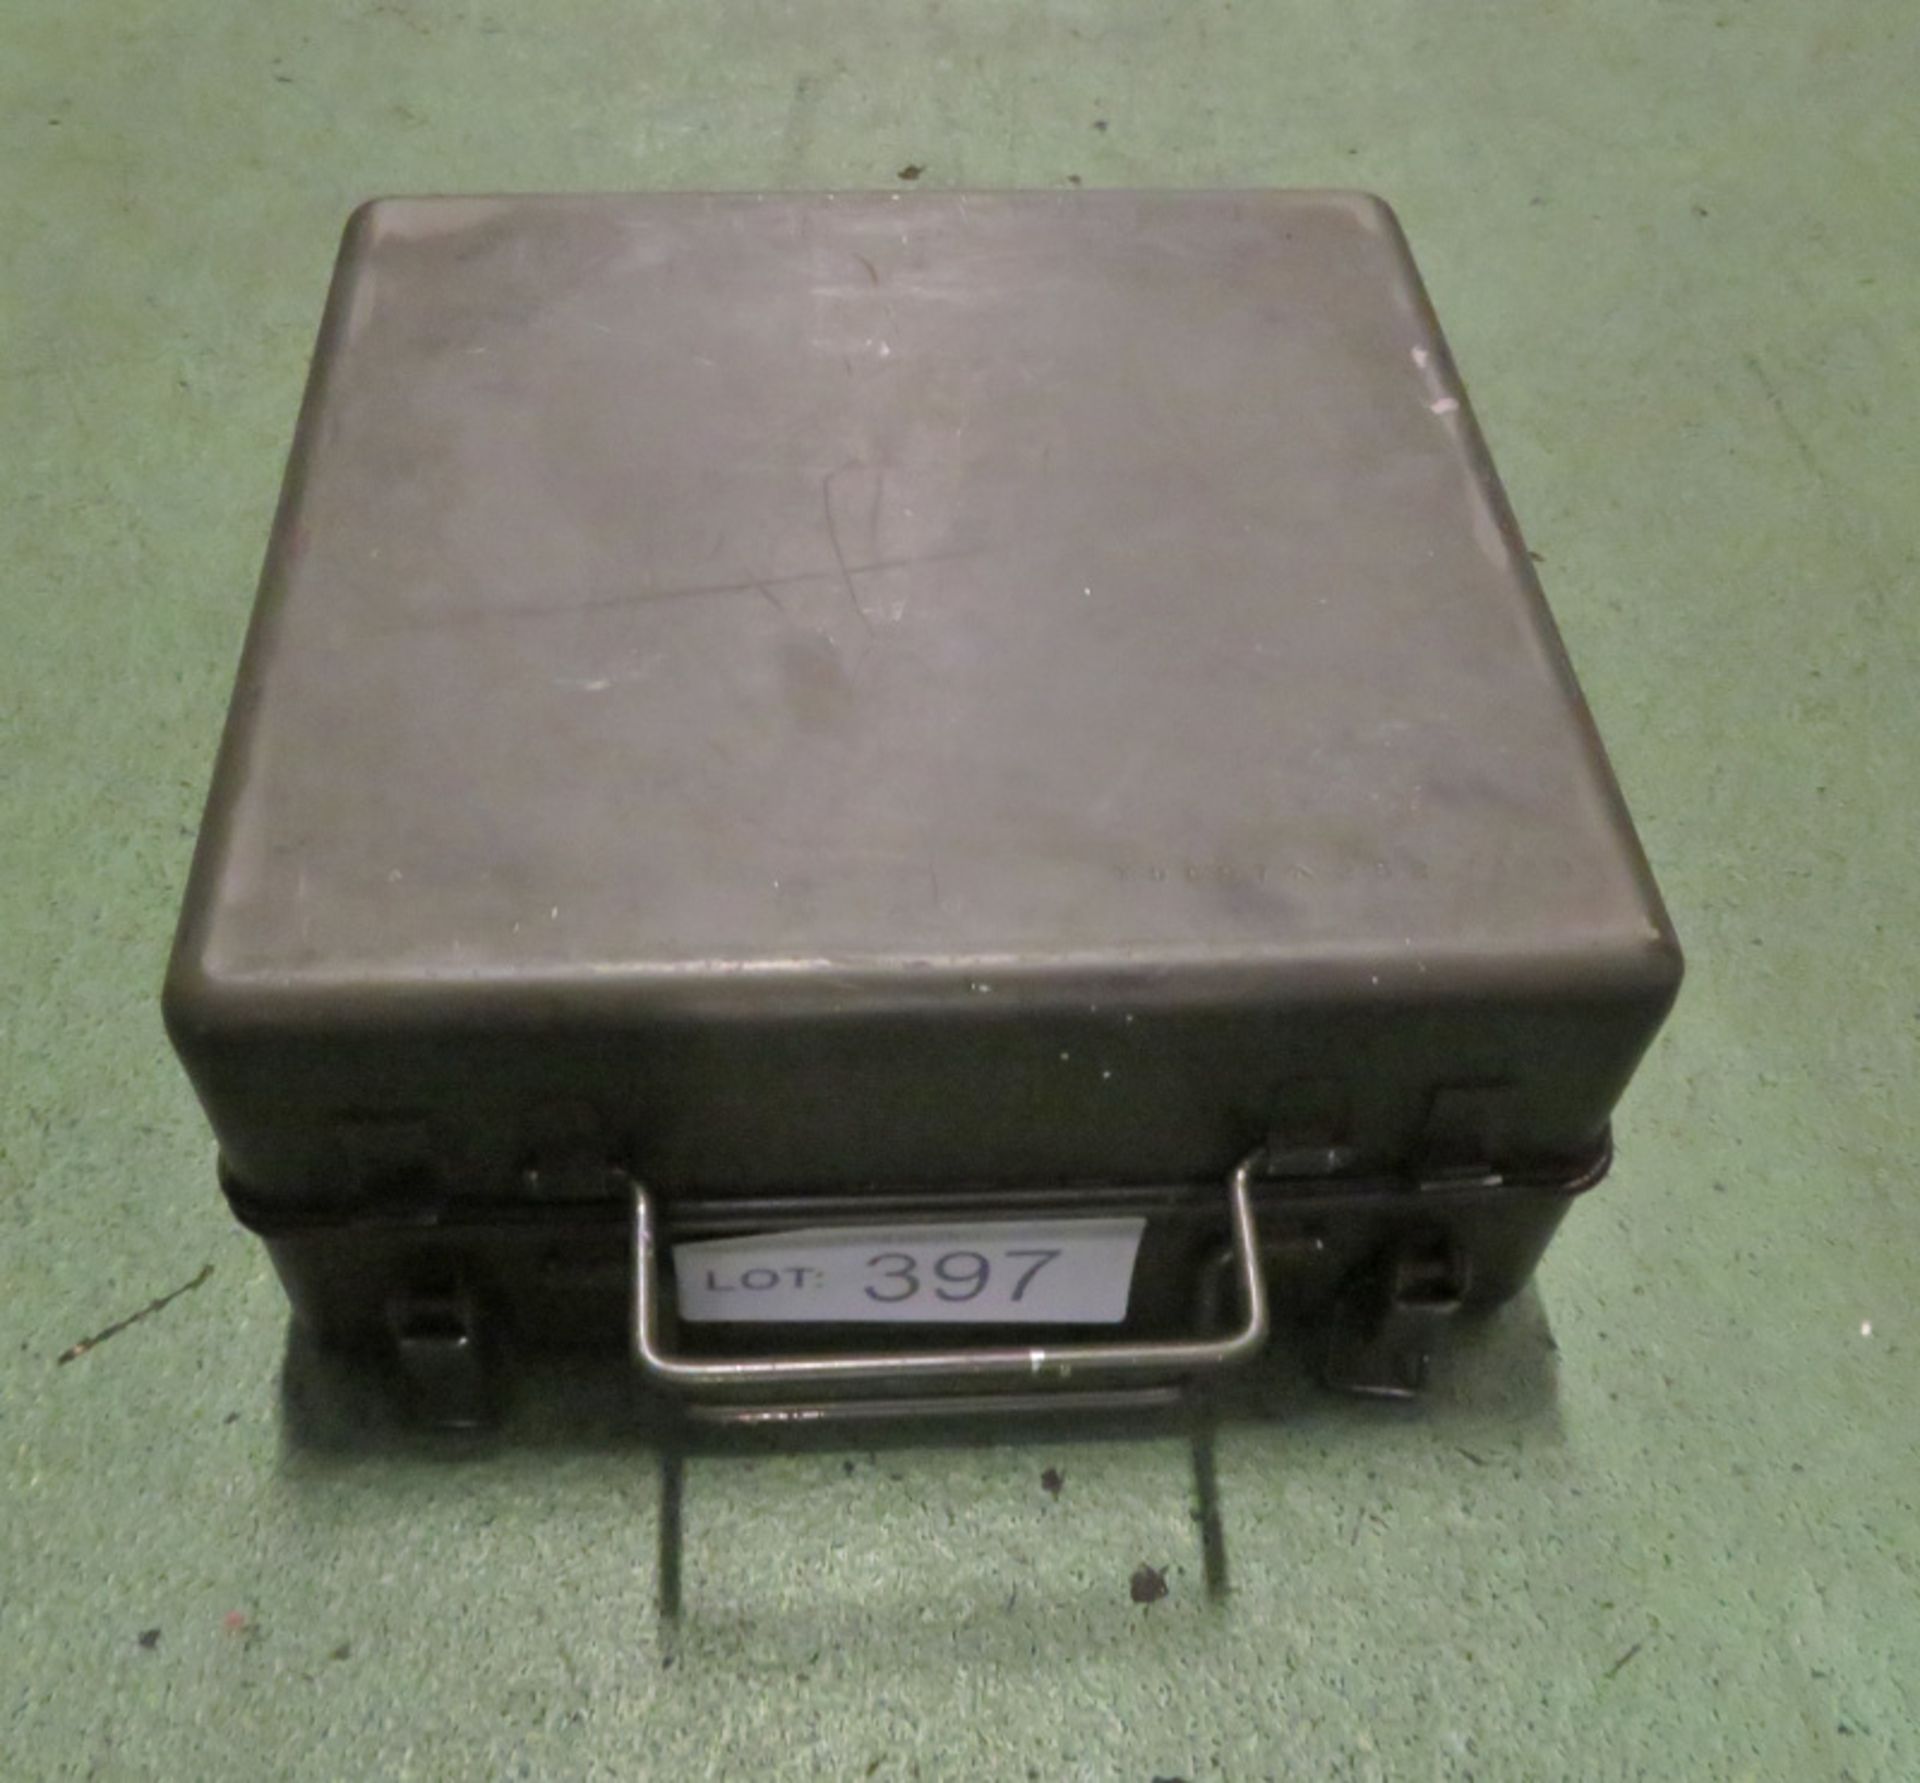 T.O.C No.12 Small Fuel Cooking Stove - Image 3 of 3